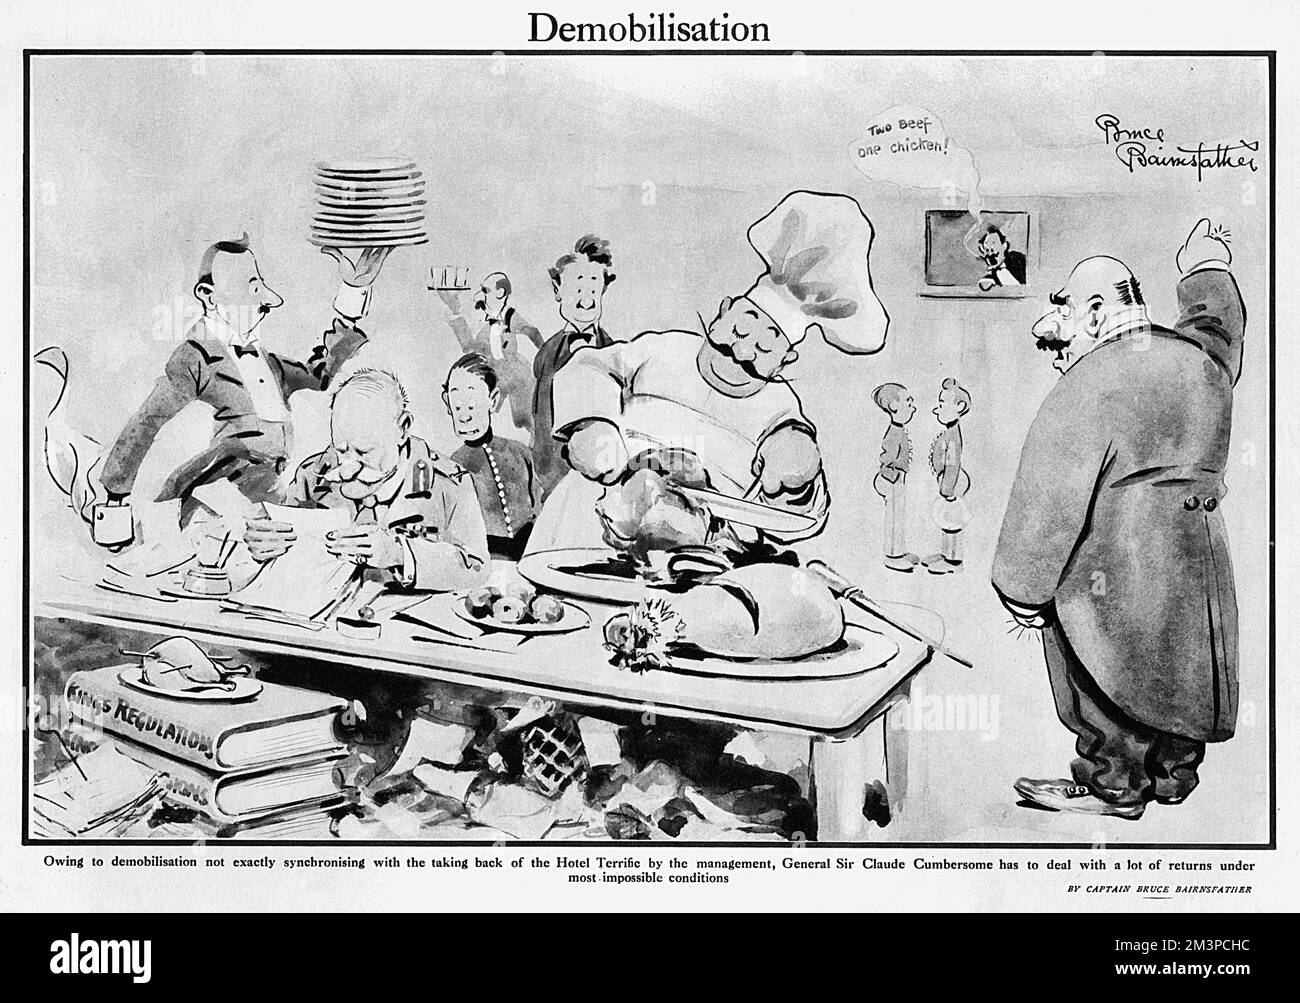 'Owing to demobilisation not exactly synchronising with the taking back of the Hotel Terrific by the management, General Sir Claude Cumbersome has to deal with a lot of returns under most impossible conditions.' During the First World War, a number of smart hotels were requisitioned for military use.  According to this cartoon by Bruce Bairnsfather in The Bystander, the hoteliers have moved back in with the end of the war before the military have moved out!    1919 Stock Photo